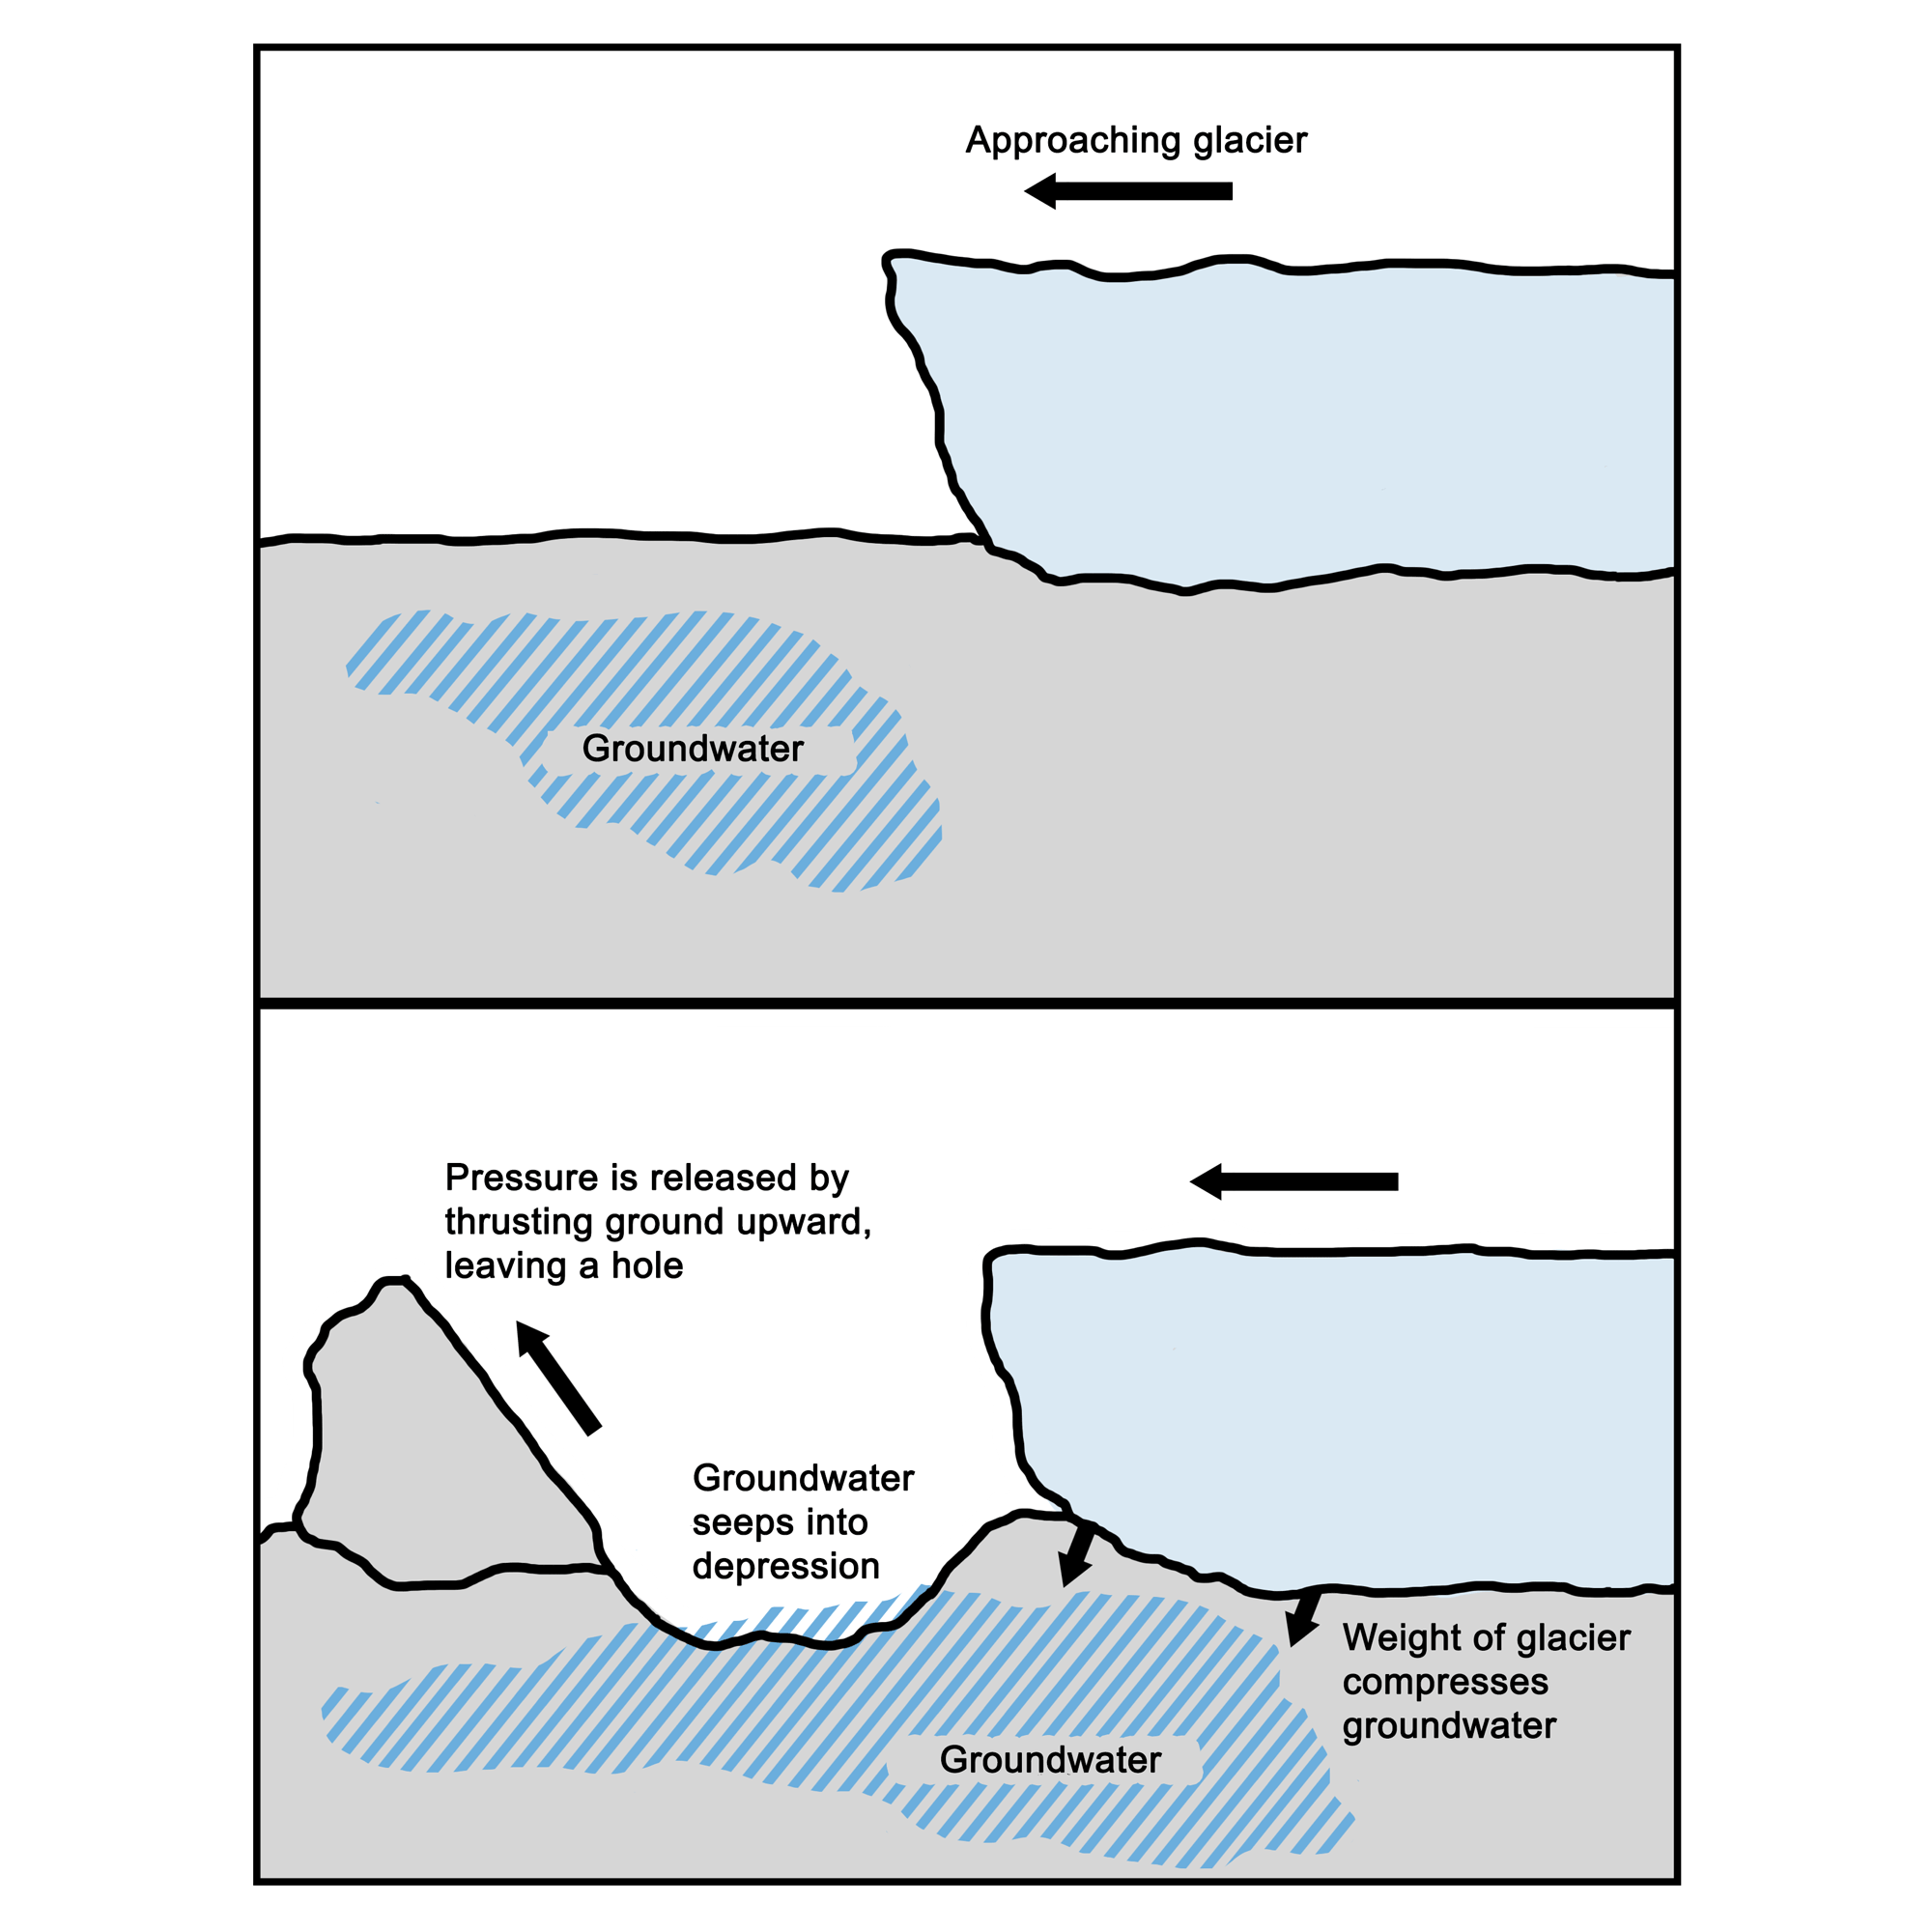 Simple illustration showing how ice-thrust features are formed.